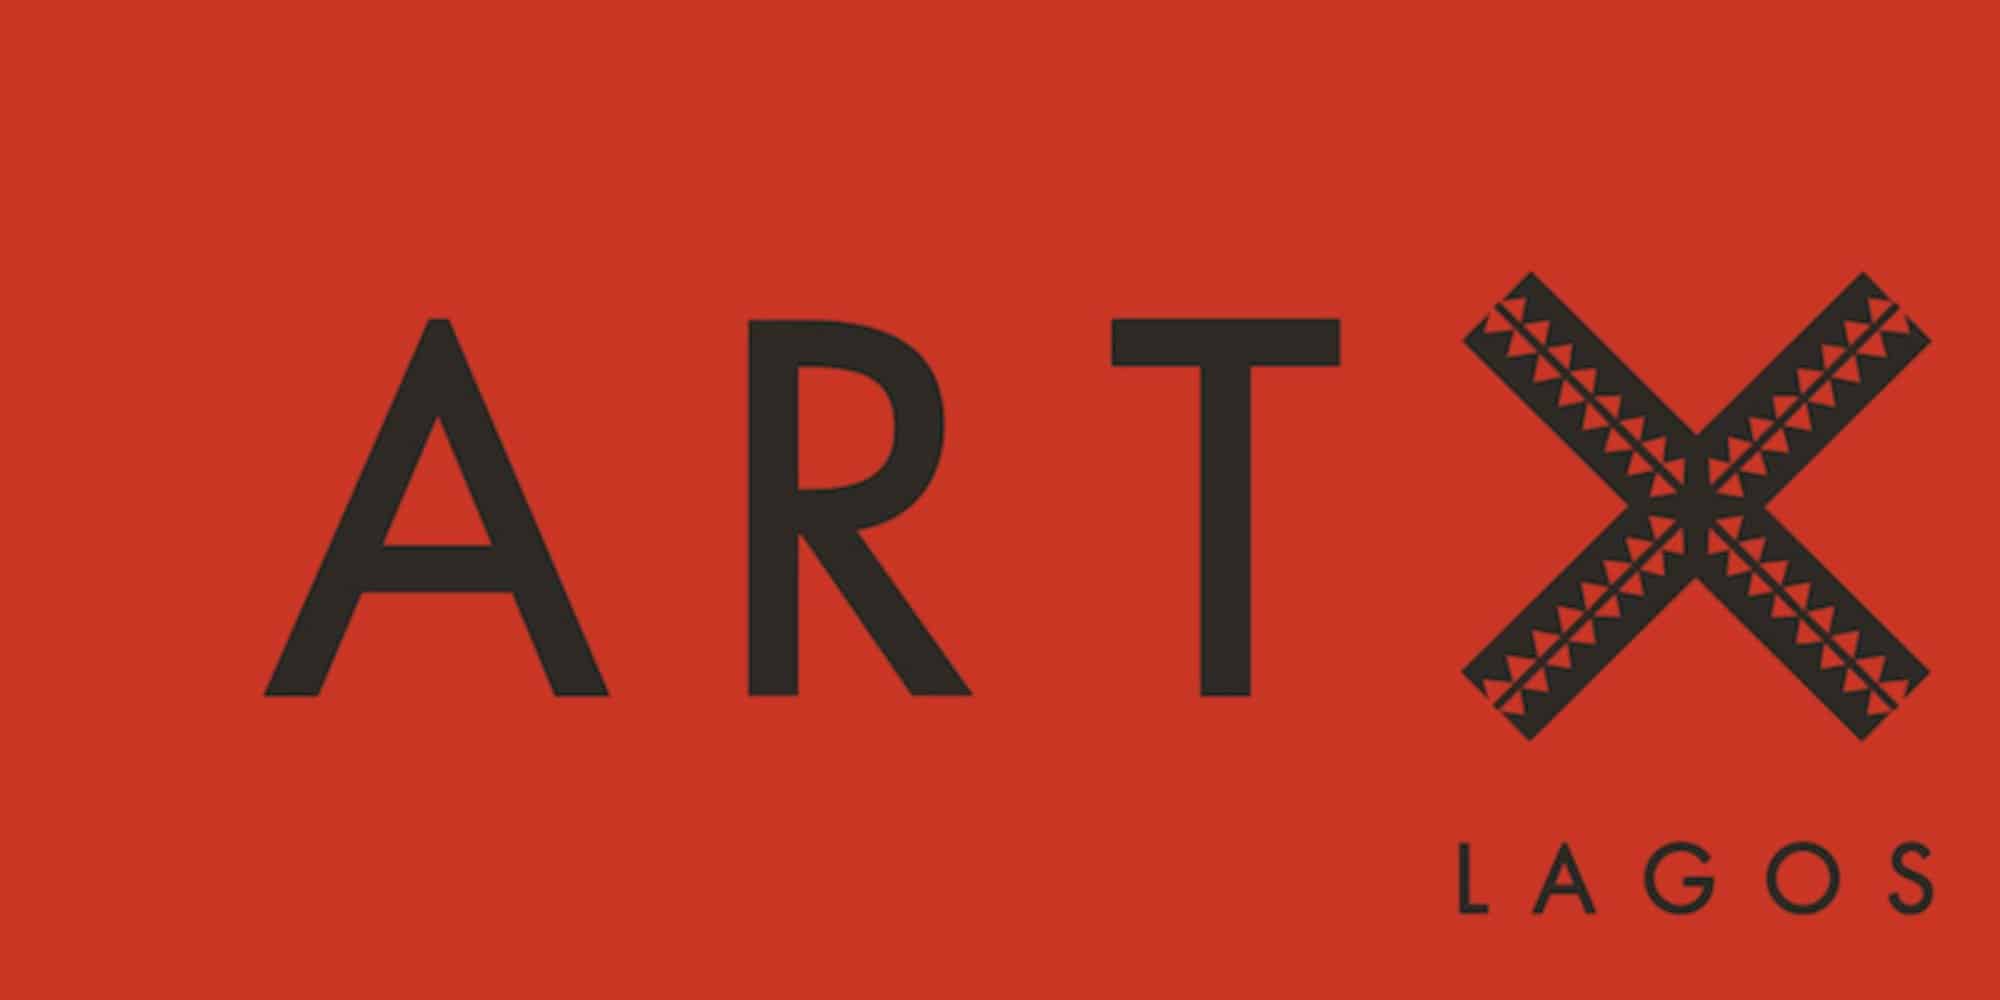 ART X Lagos returns this year for its sixth edition 